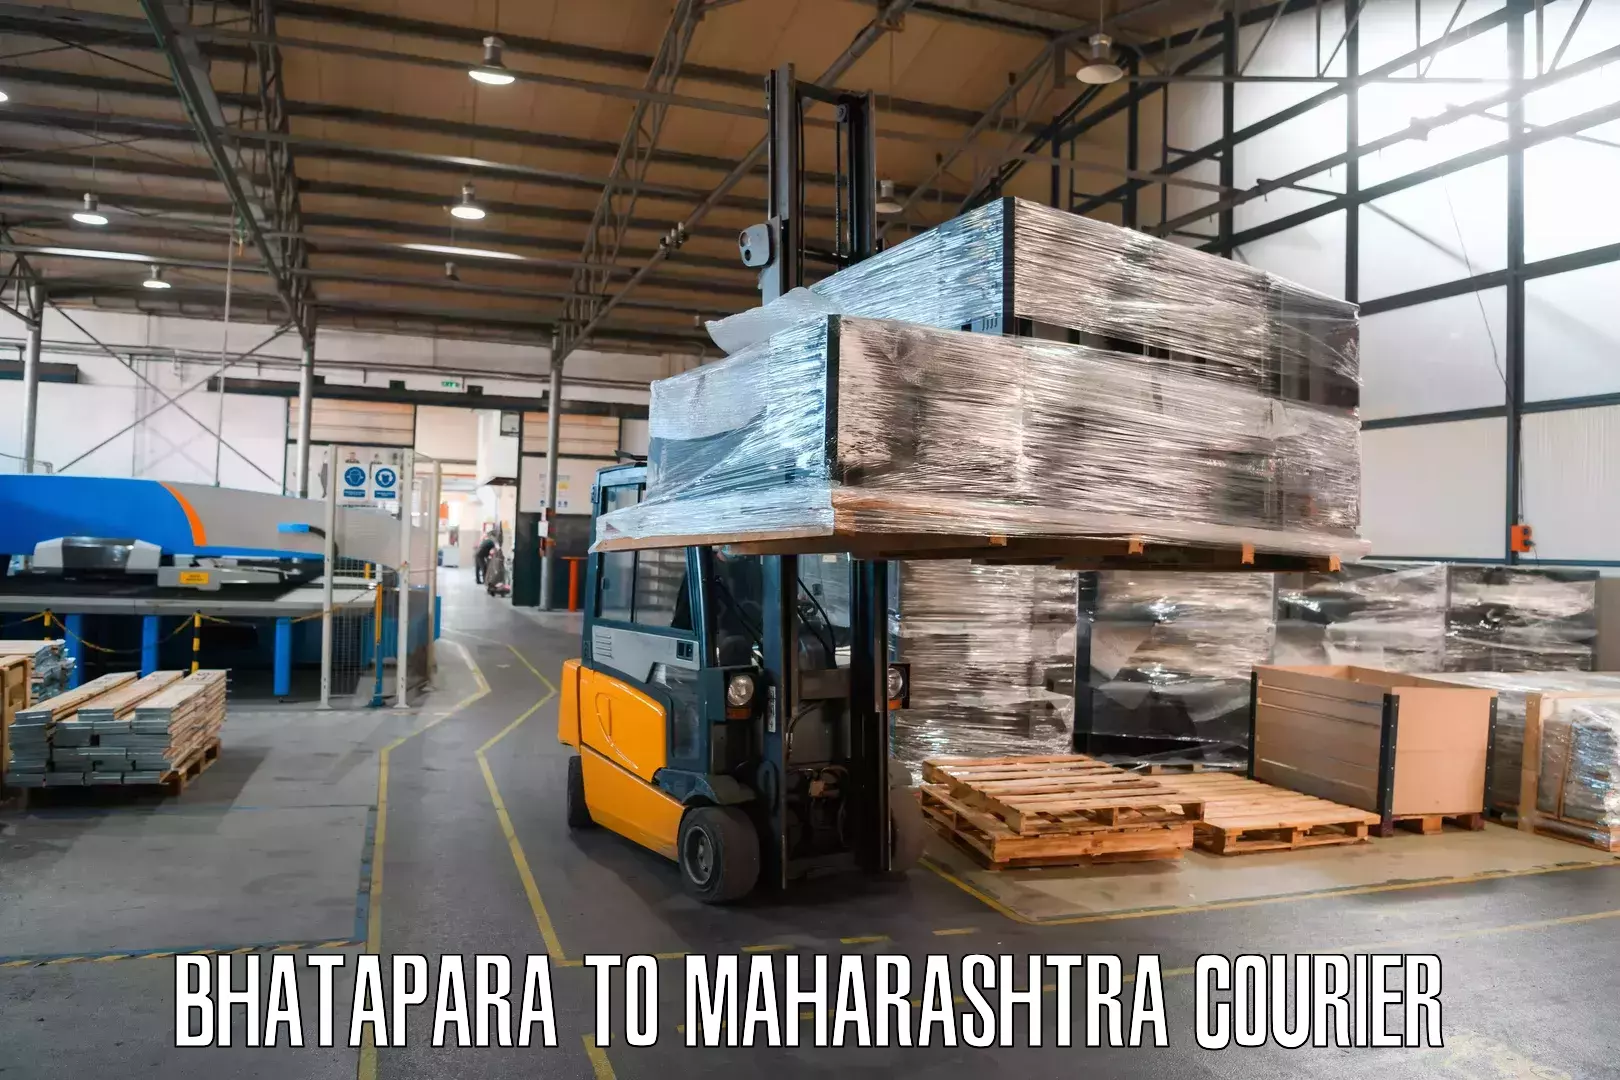 Flexible delivery schedules Bhatapara to Karjat